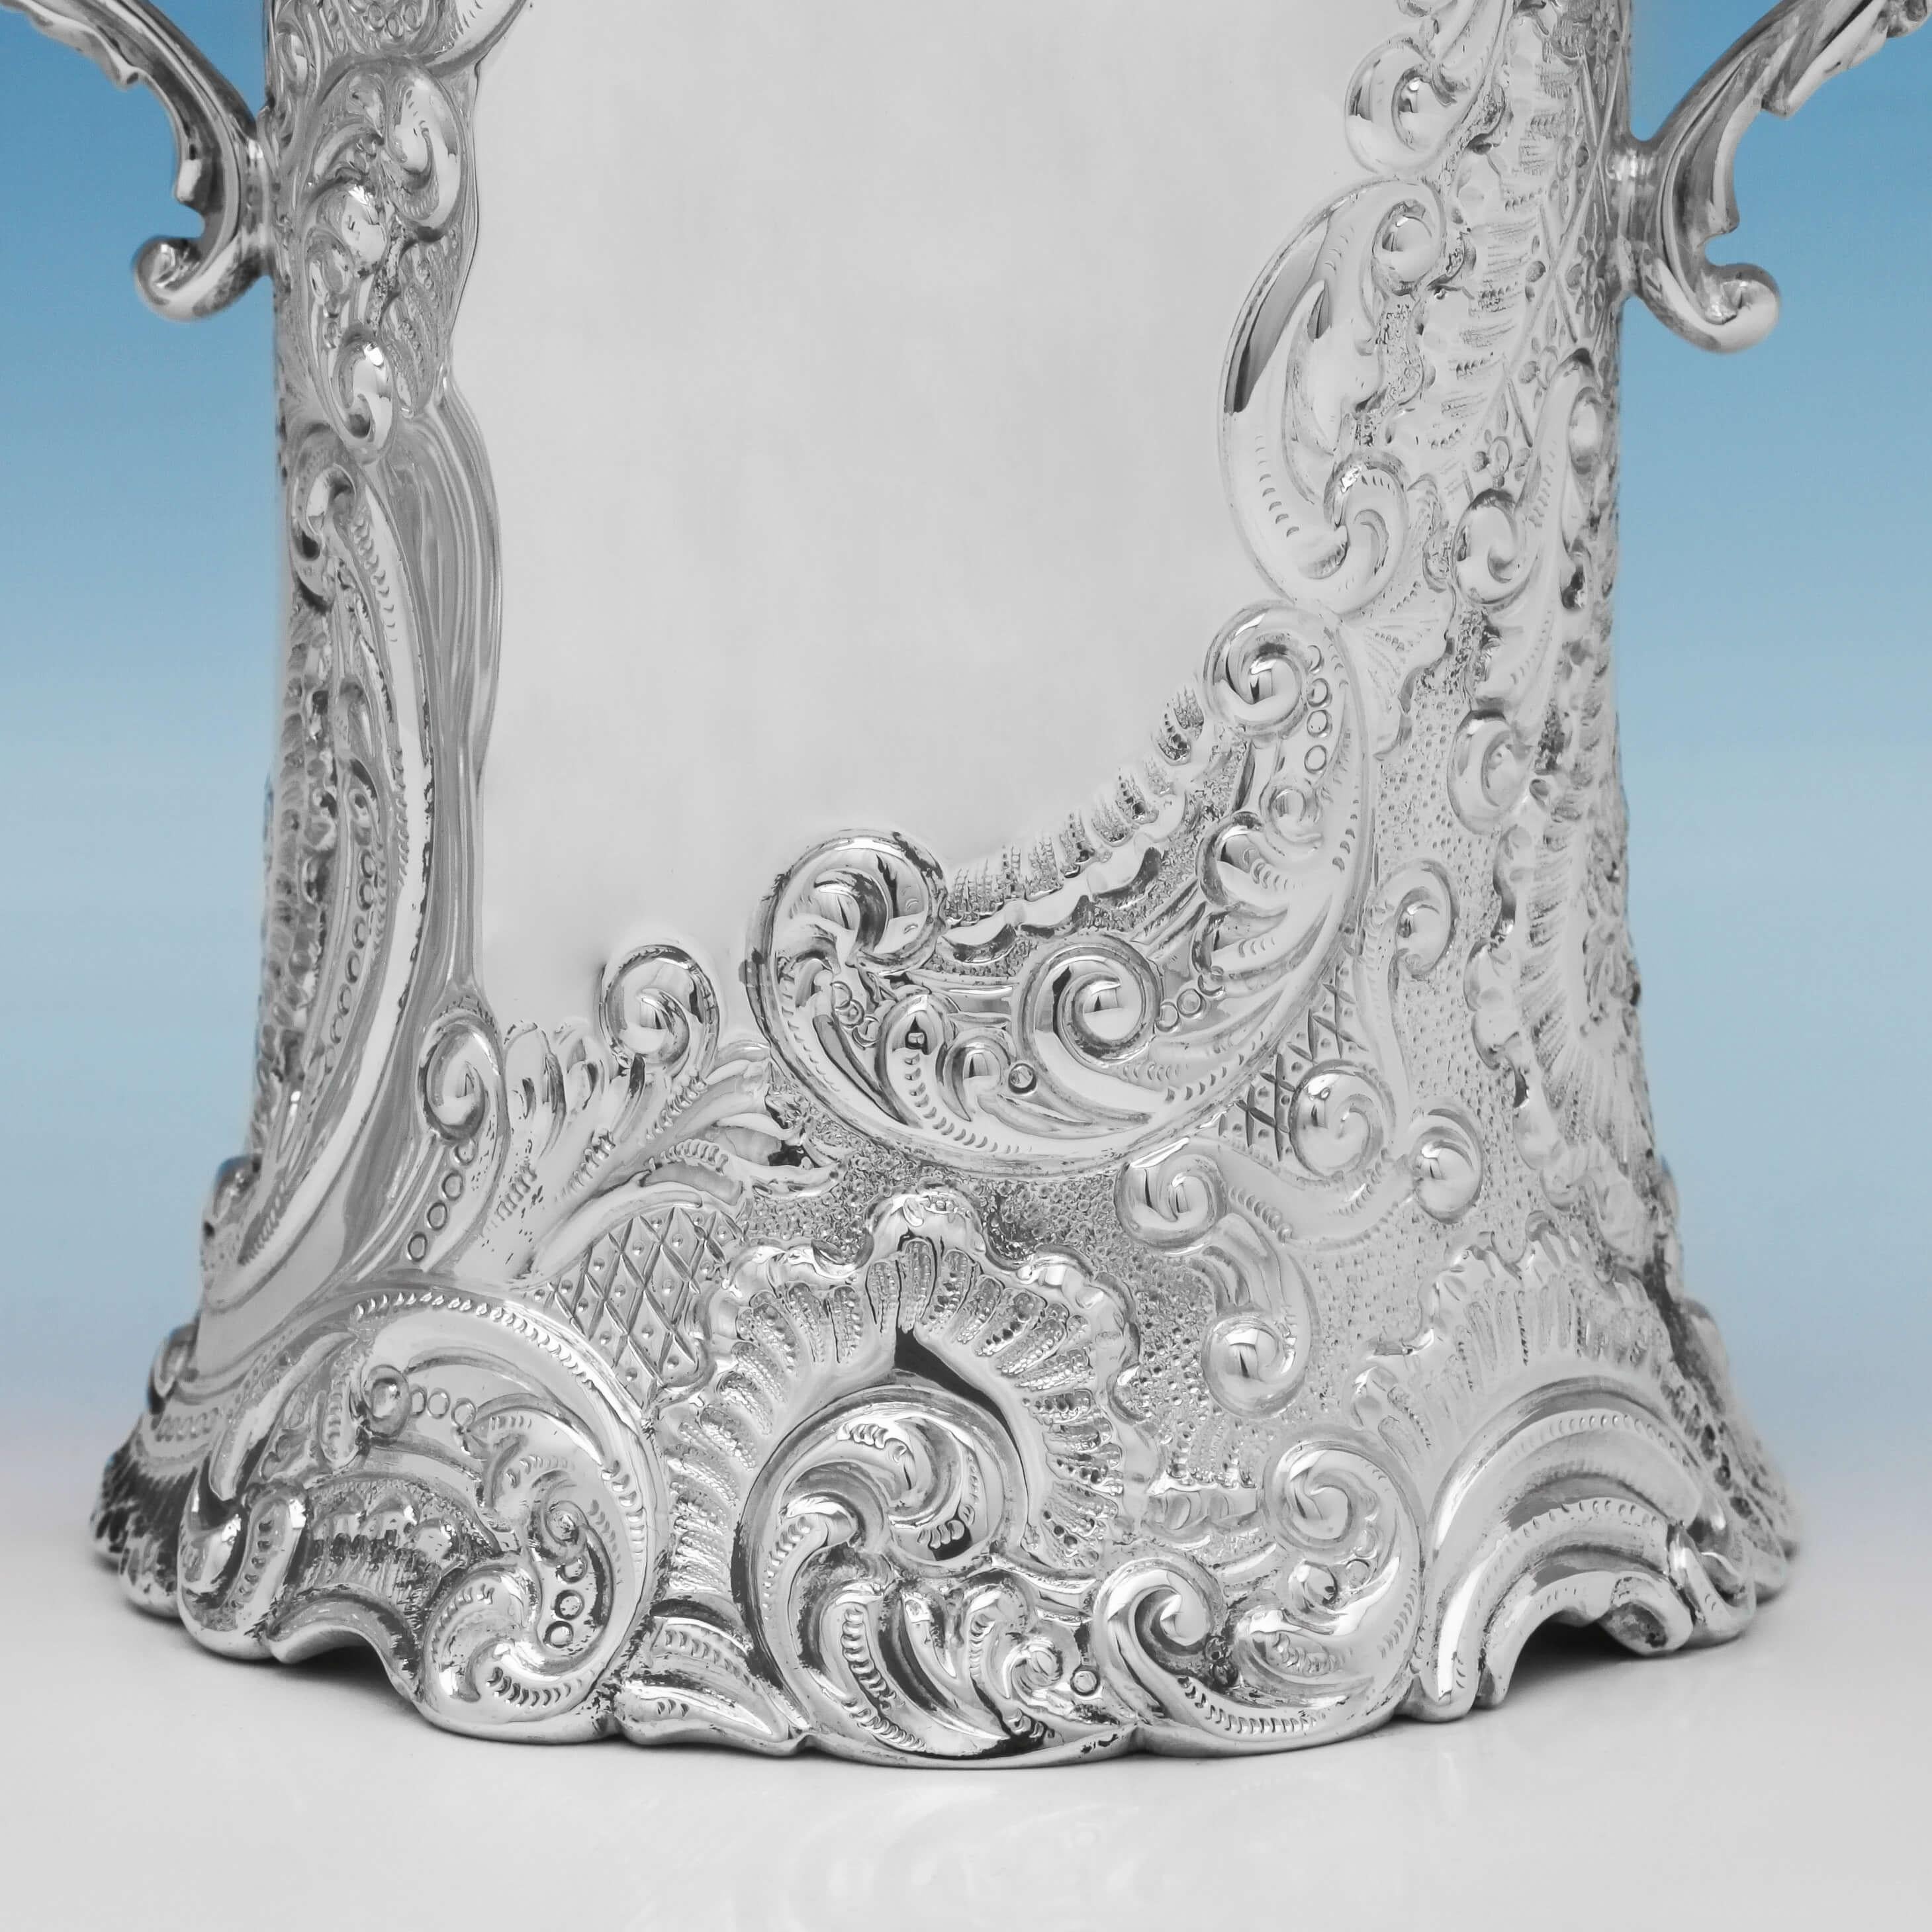 Art Nouveau Period Sterling Silver Pair of Vases from 1901 by Martin & Hall In Good Condition In London, London